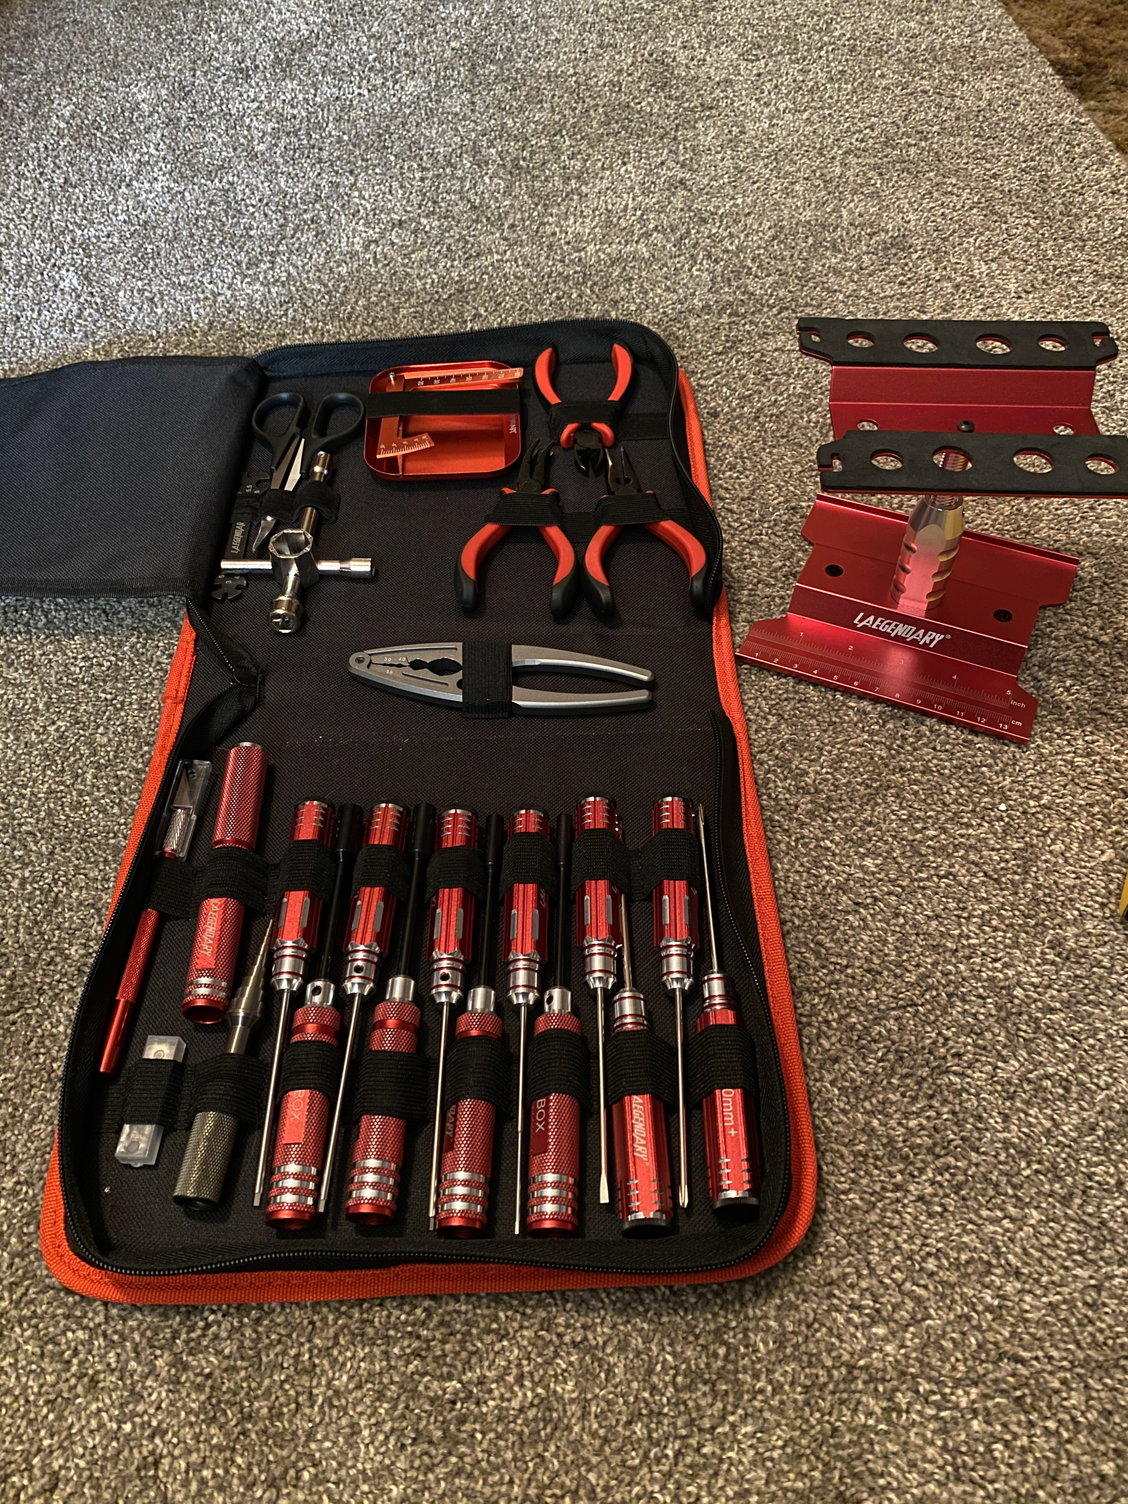 RC Tool Set. Perfect for beginners! Has everything you'll need